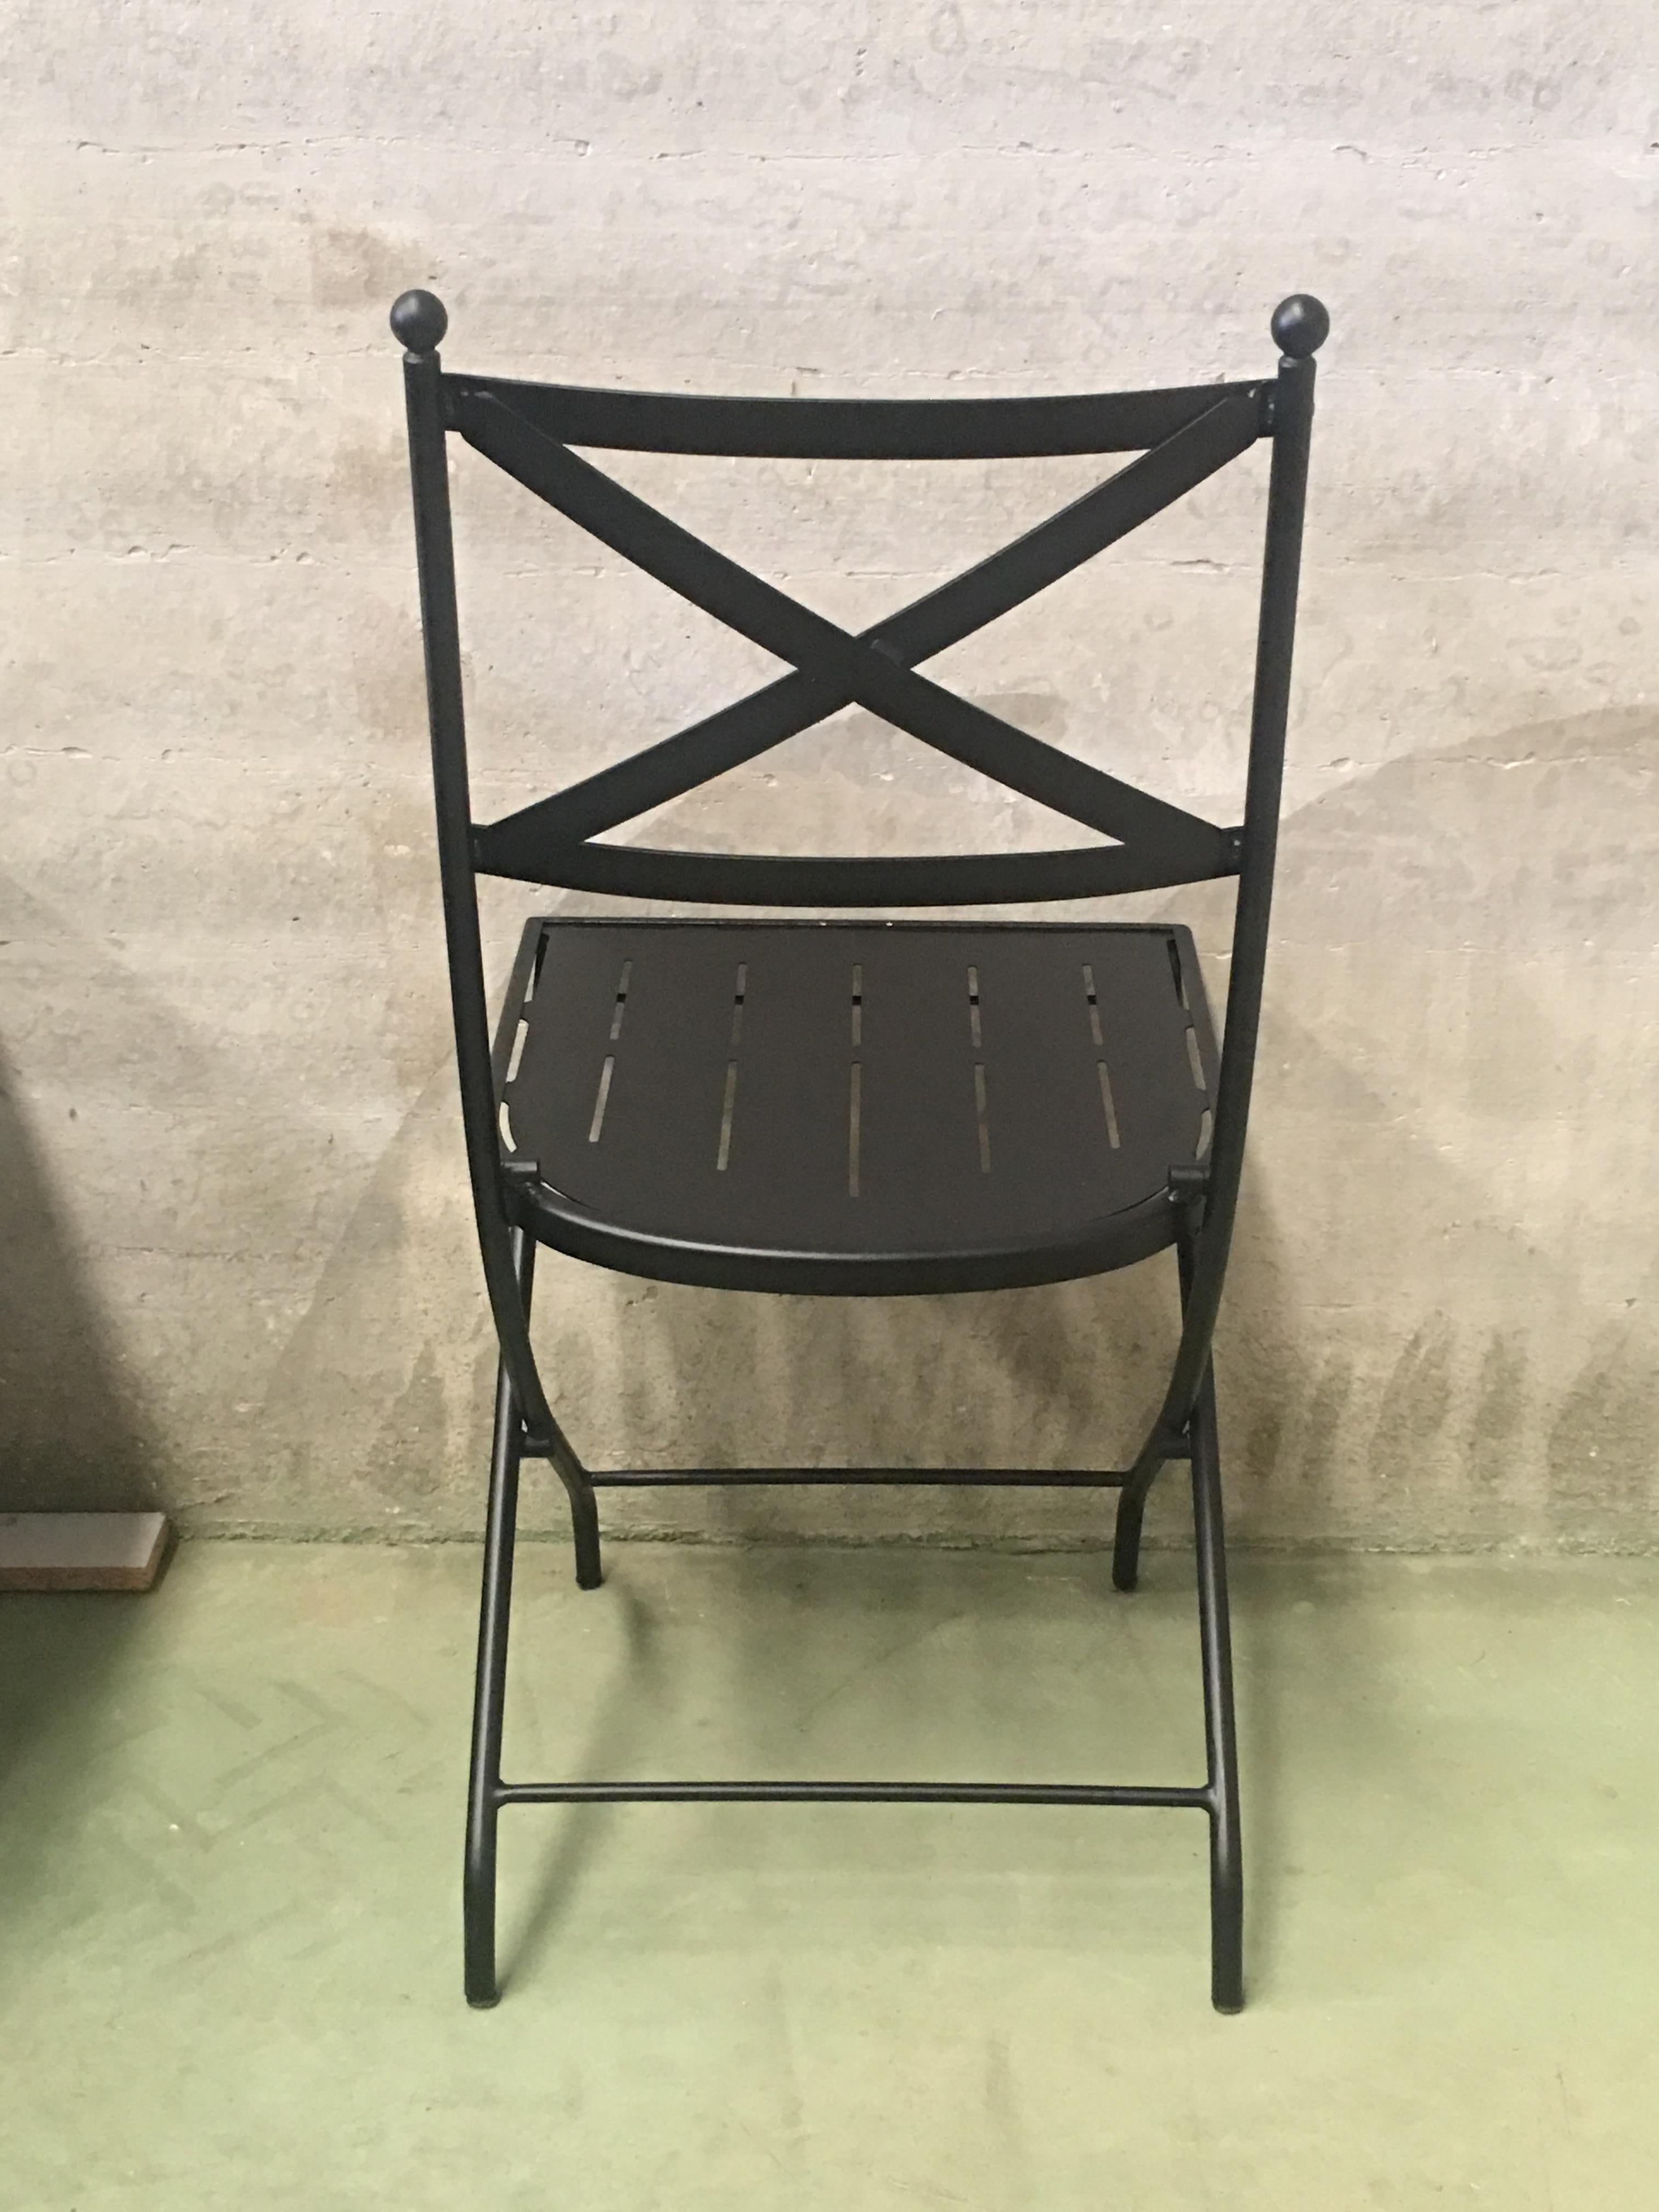 Contemporary French Vintage Style Bistro Folding Iron Chair. Indoor & Outdoor